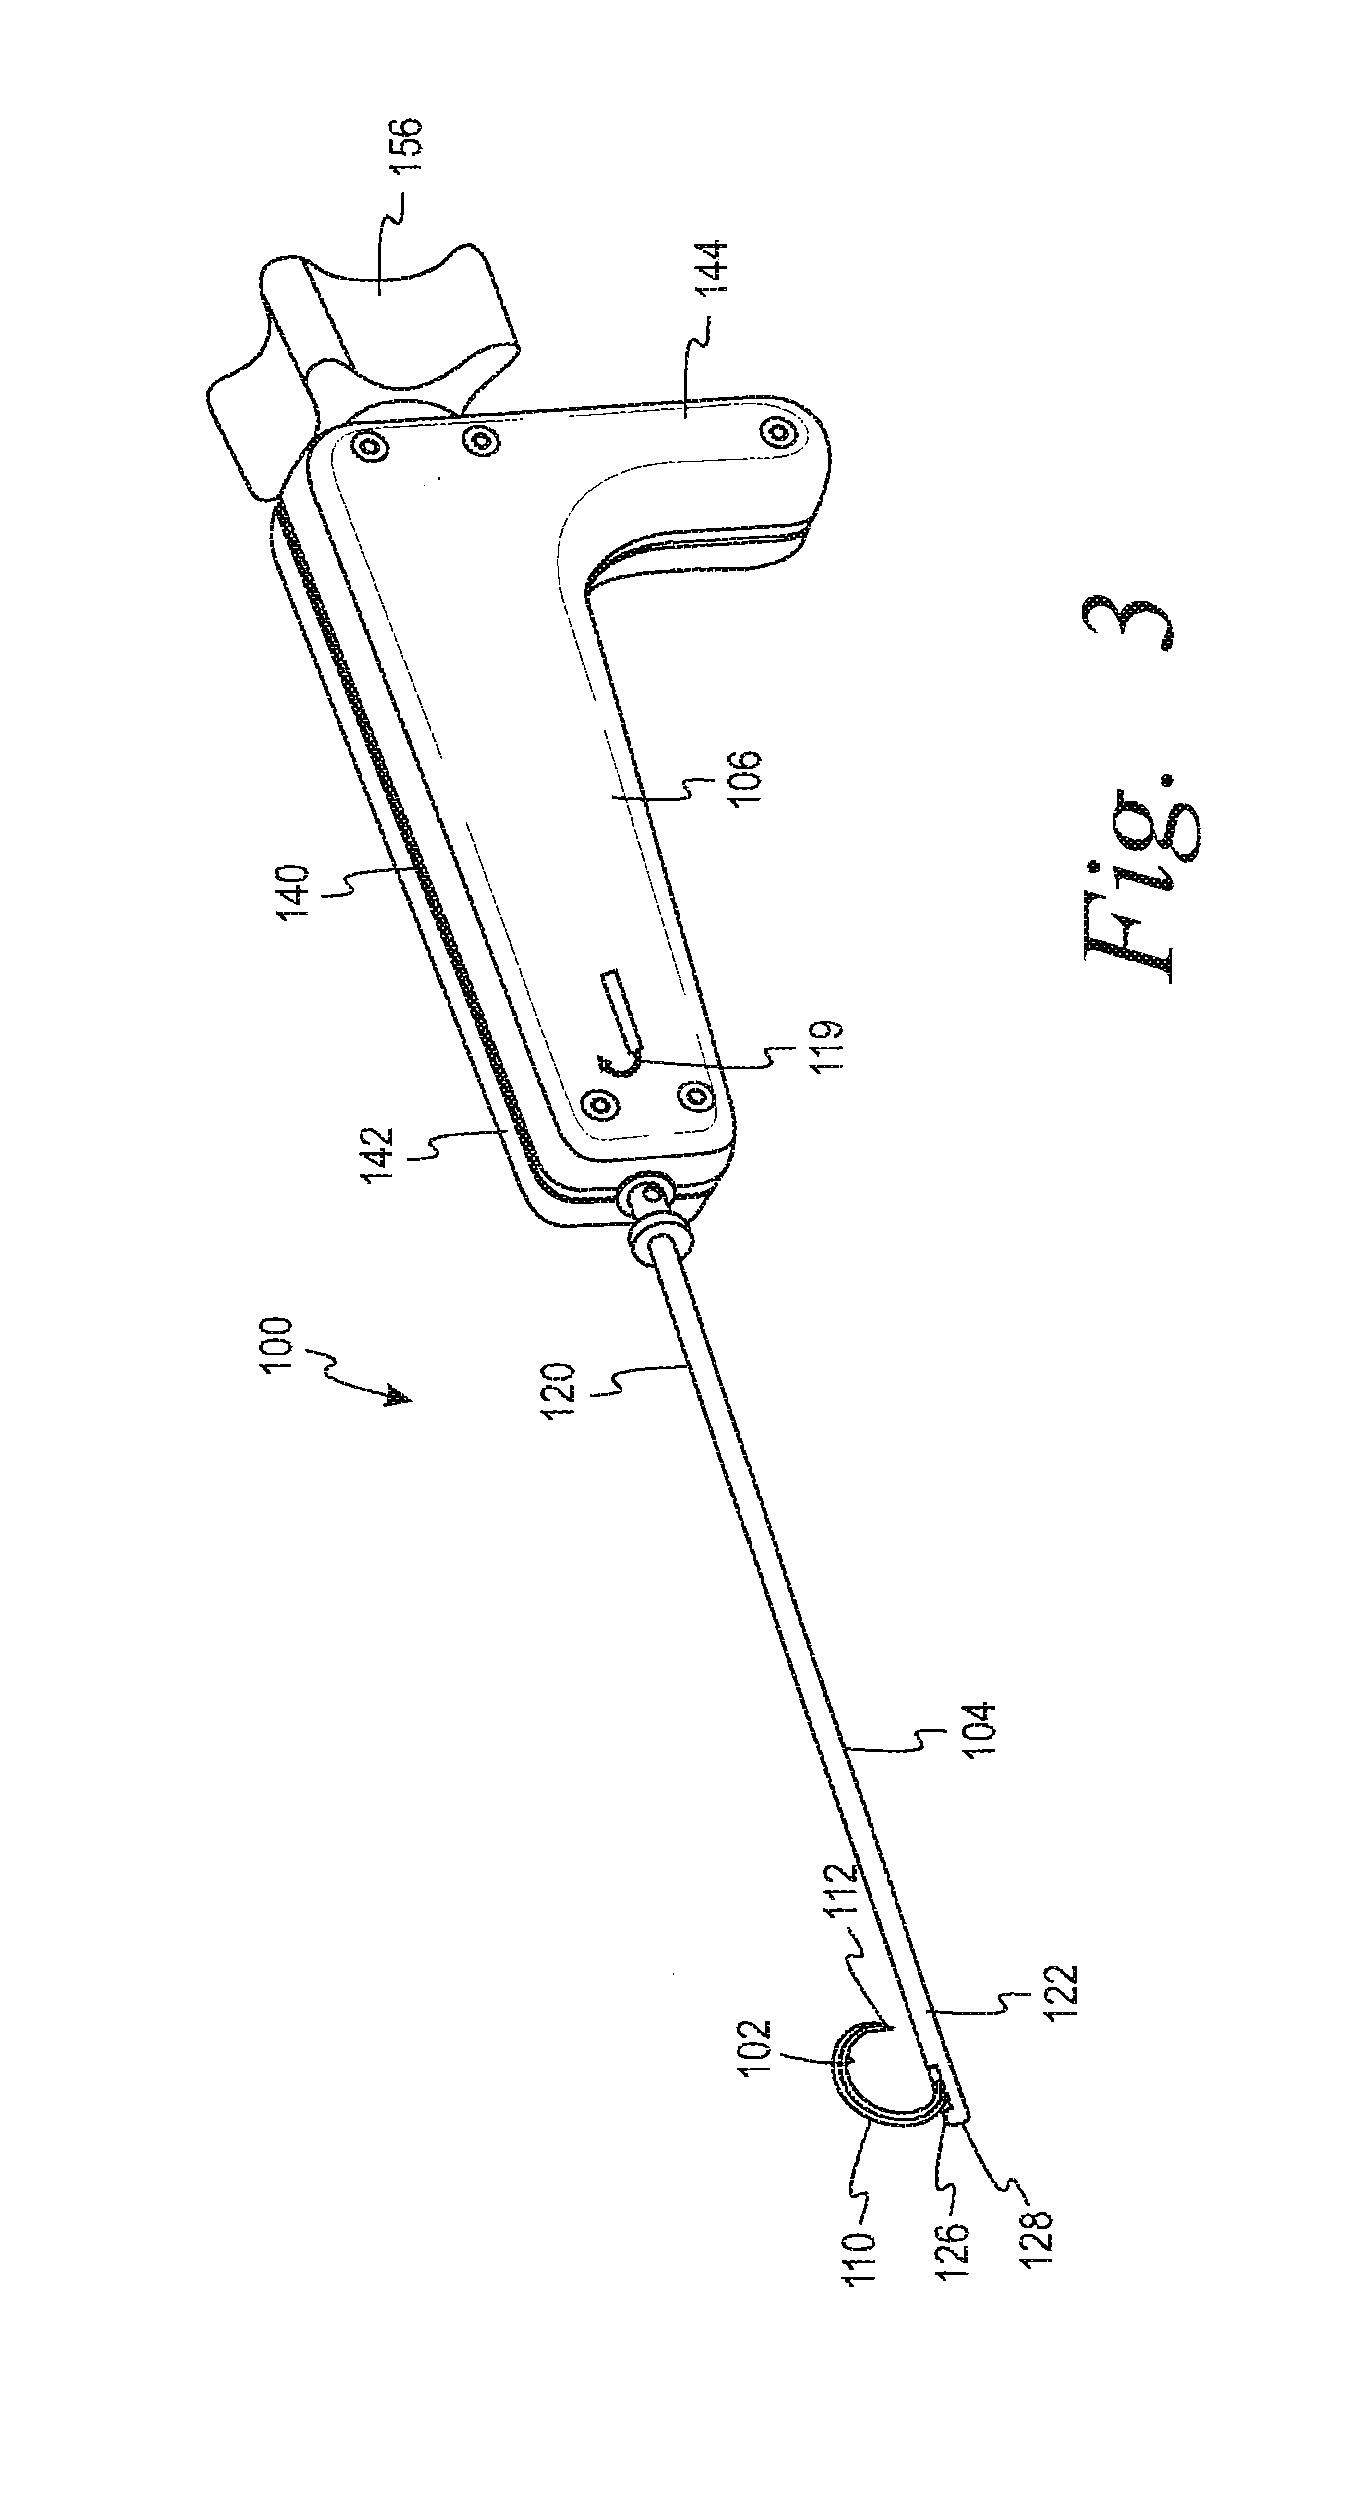 Devices and methods for treating bone tissue